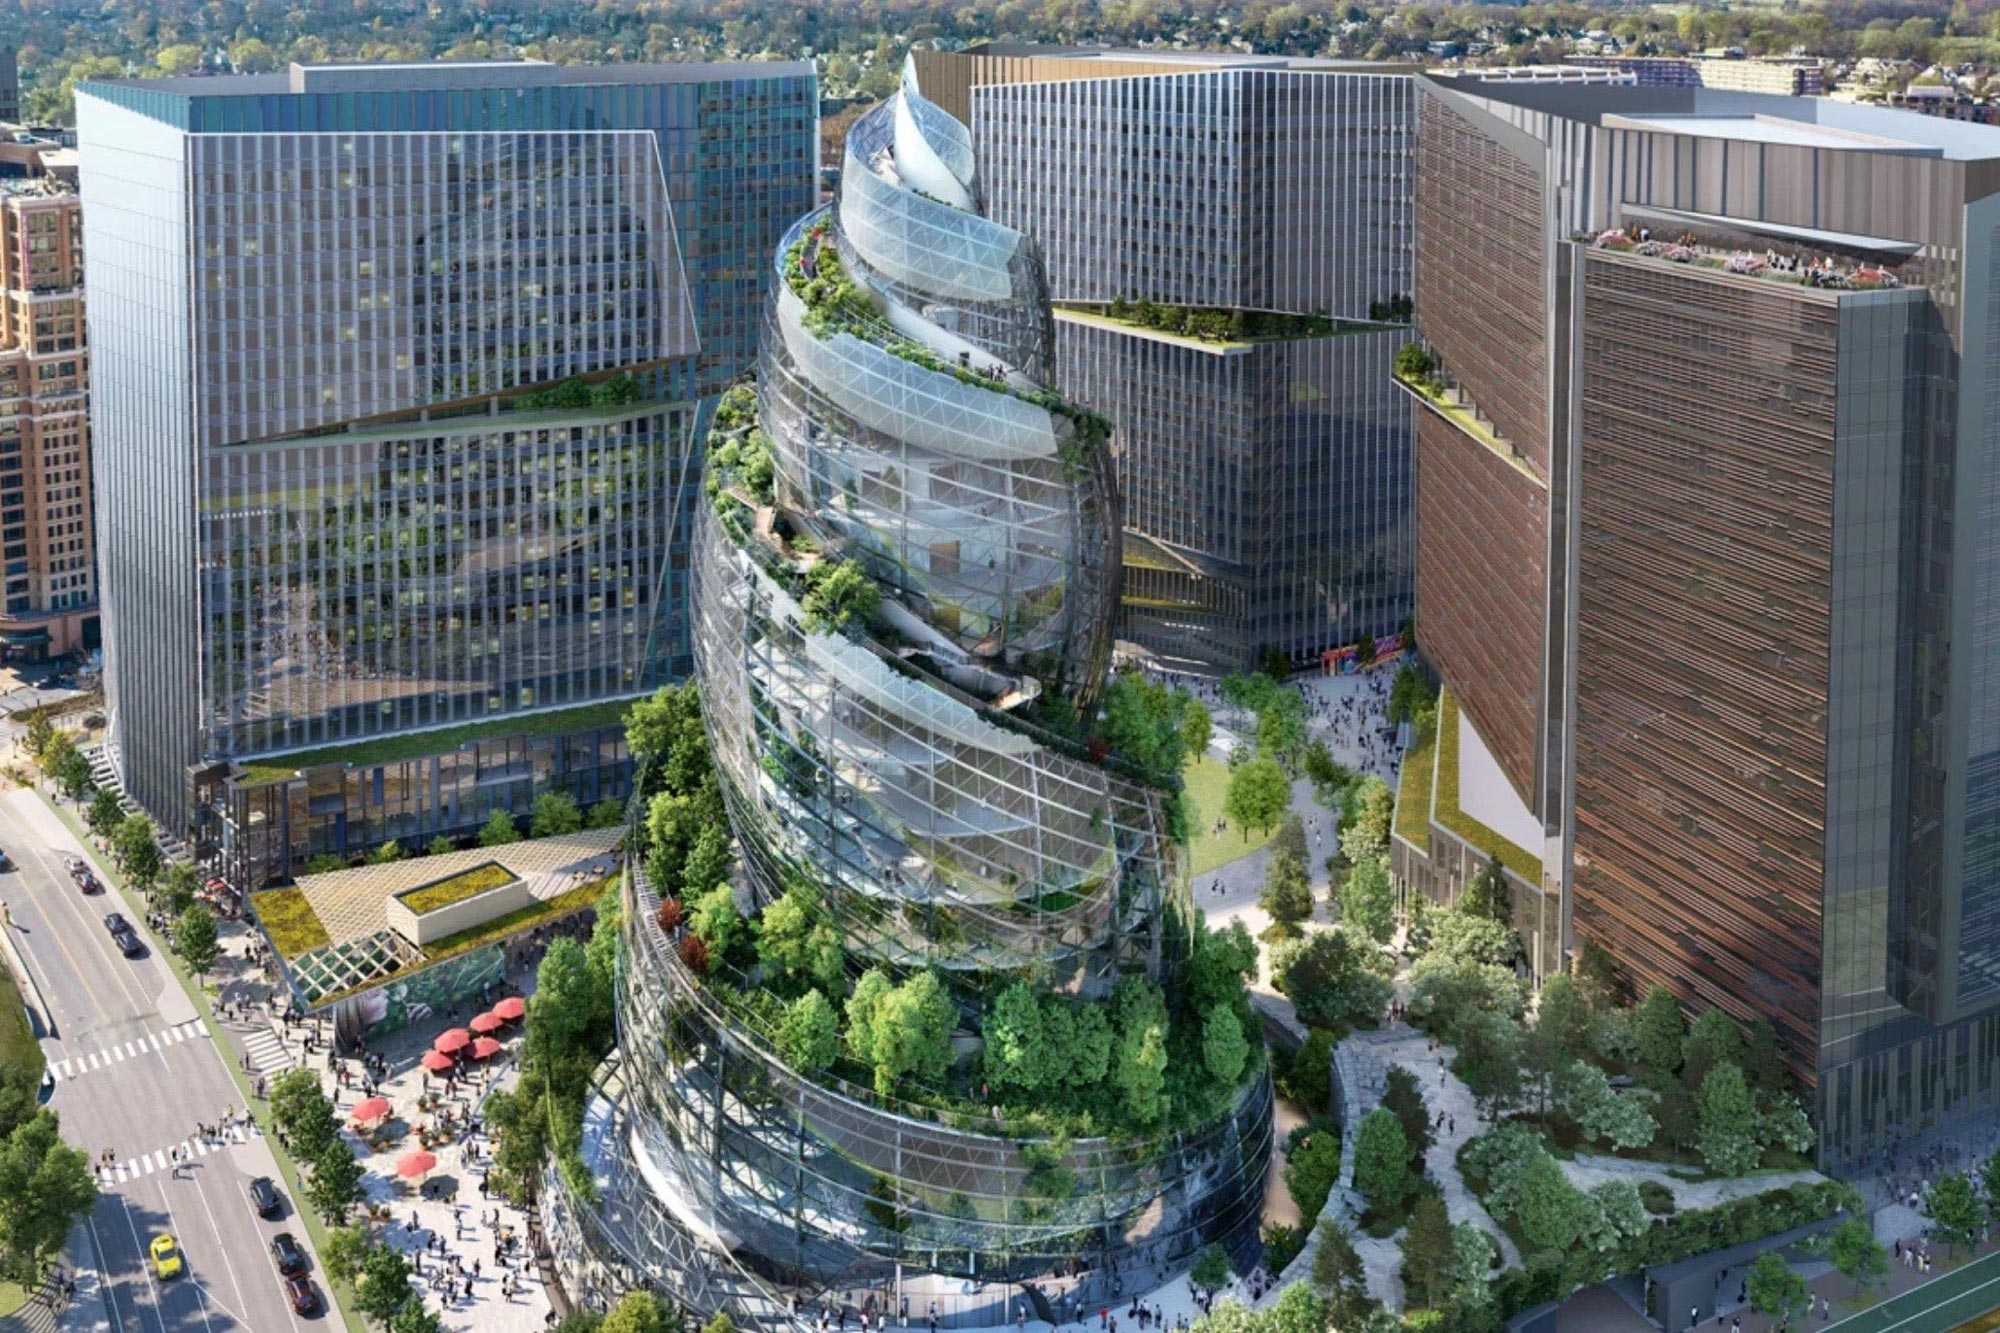 The centerpiece of Amazon’s Arlington headquarters is the 350-foot tall “Helix,” composed of steel, glass and even live trees. (Image: NBBJ, Amazon)